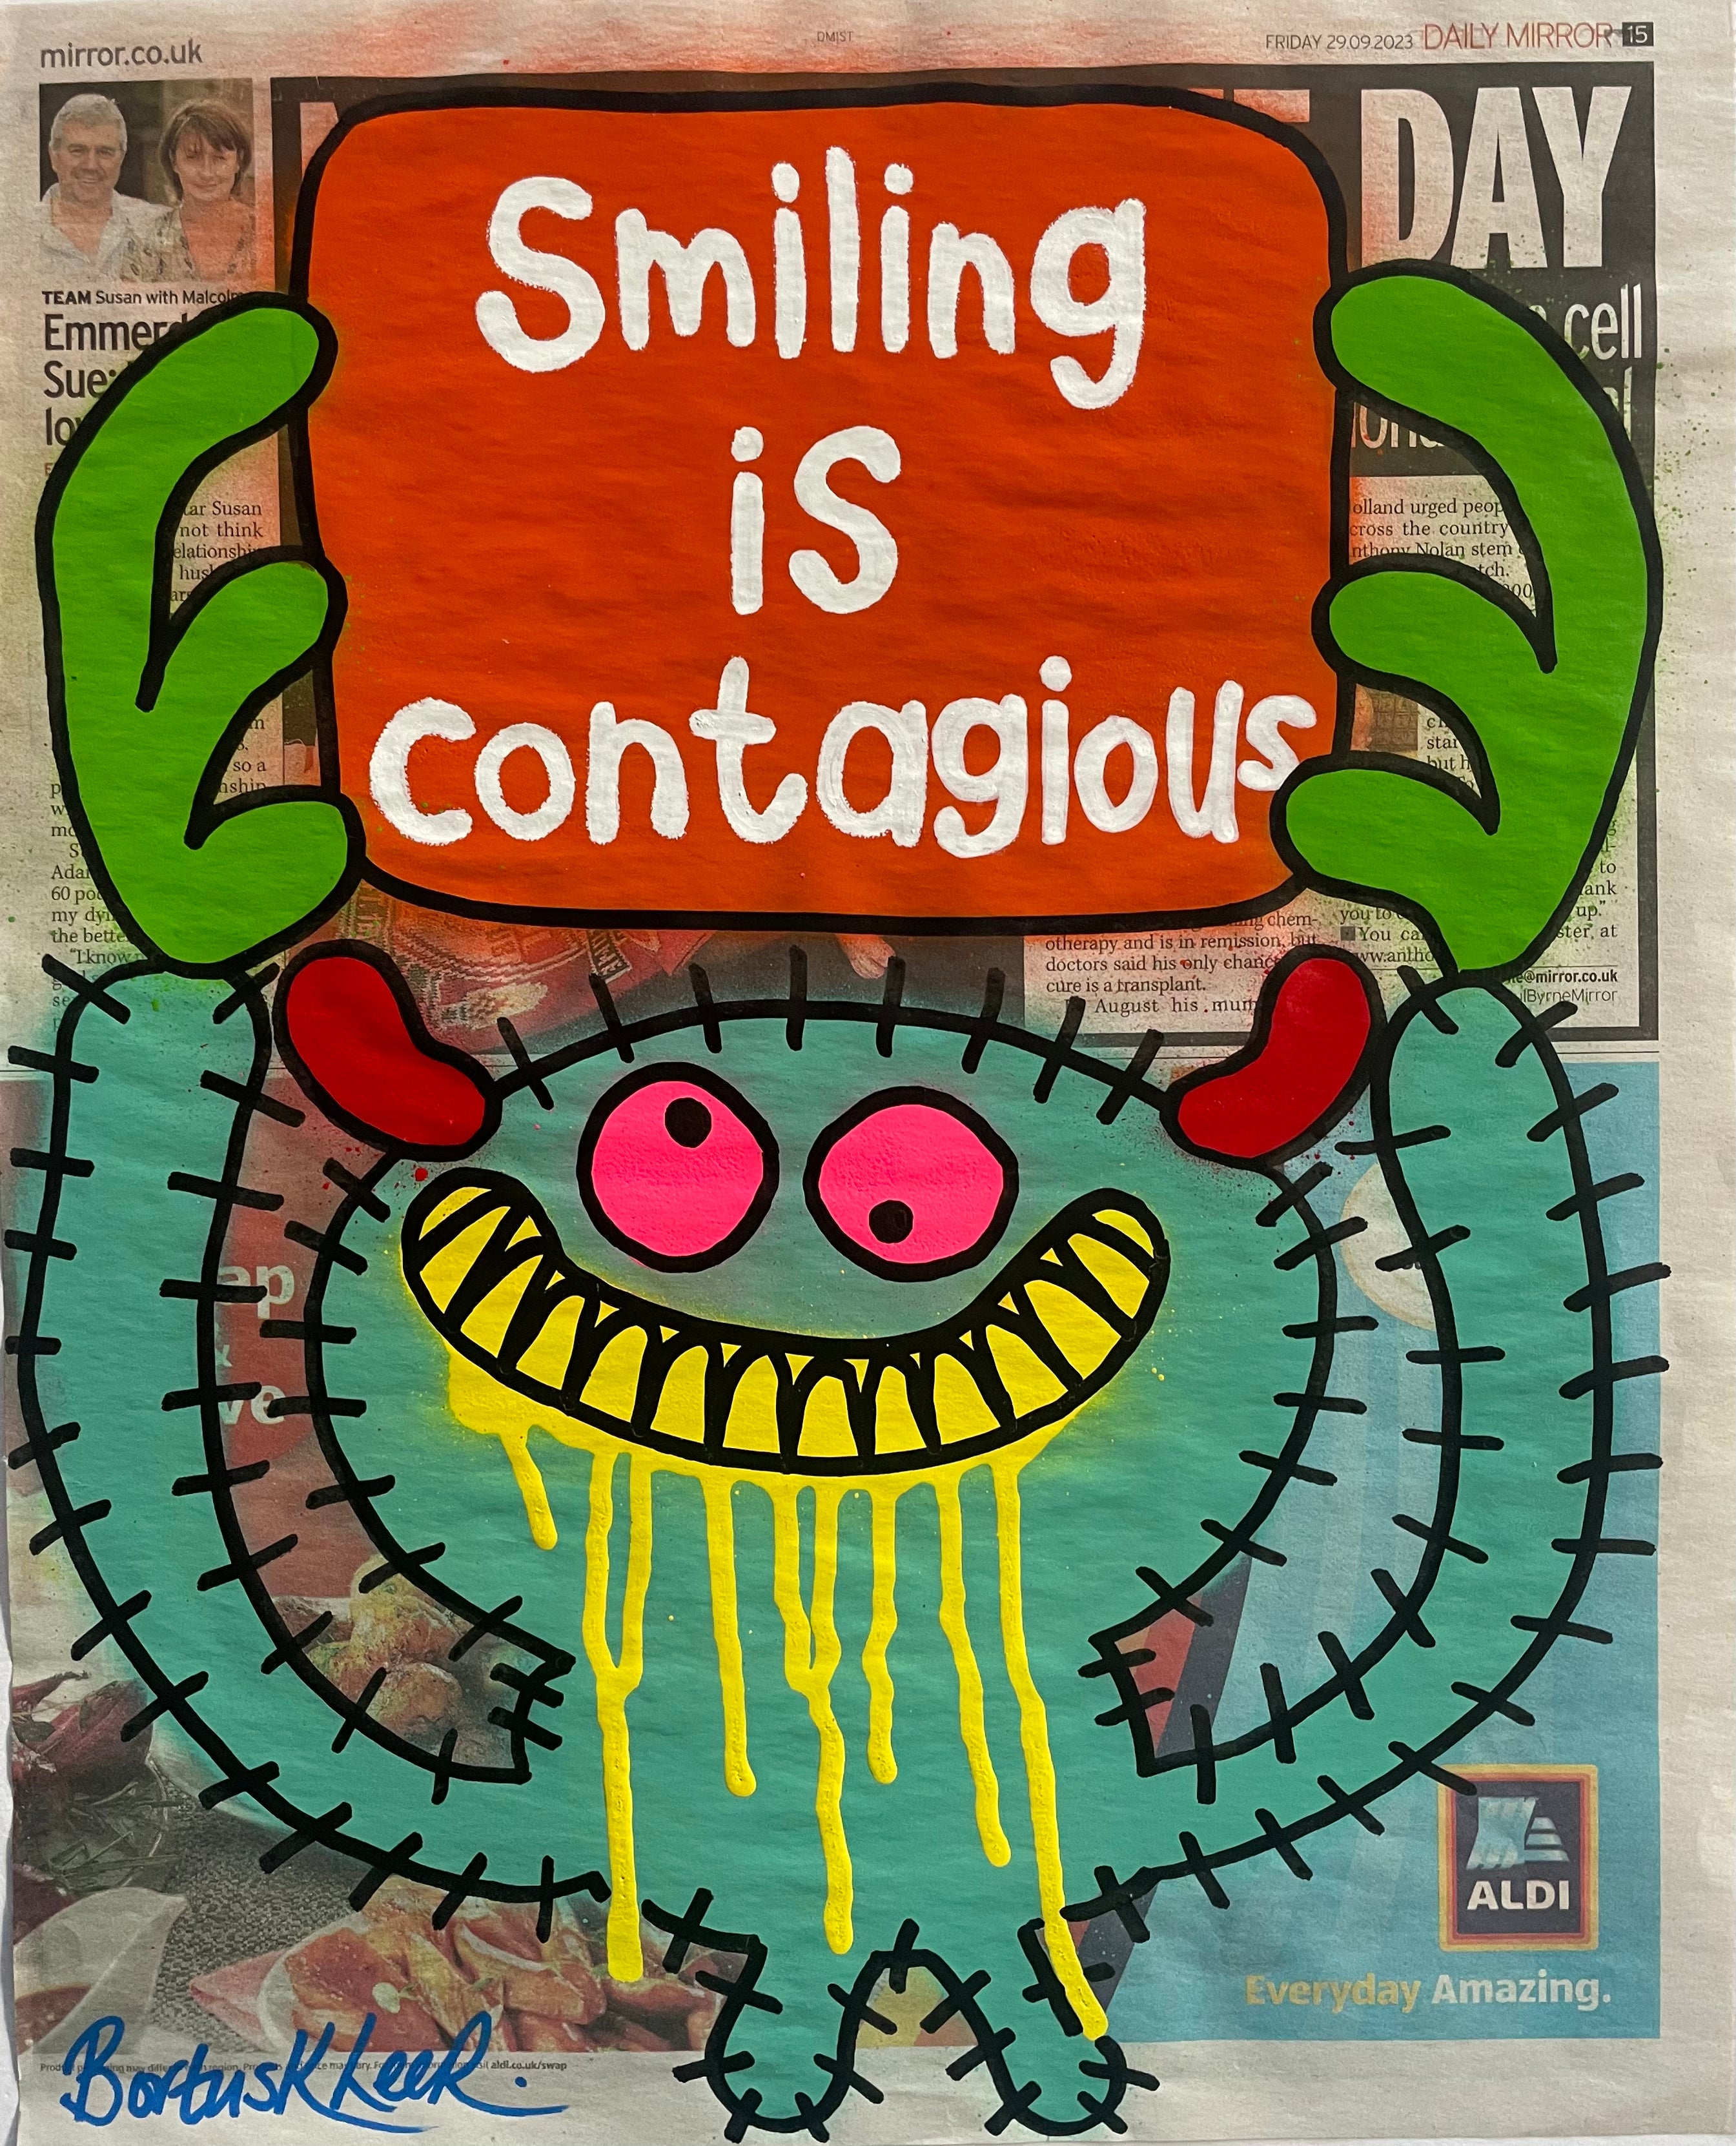 Smiling is contagious